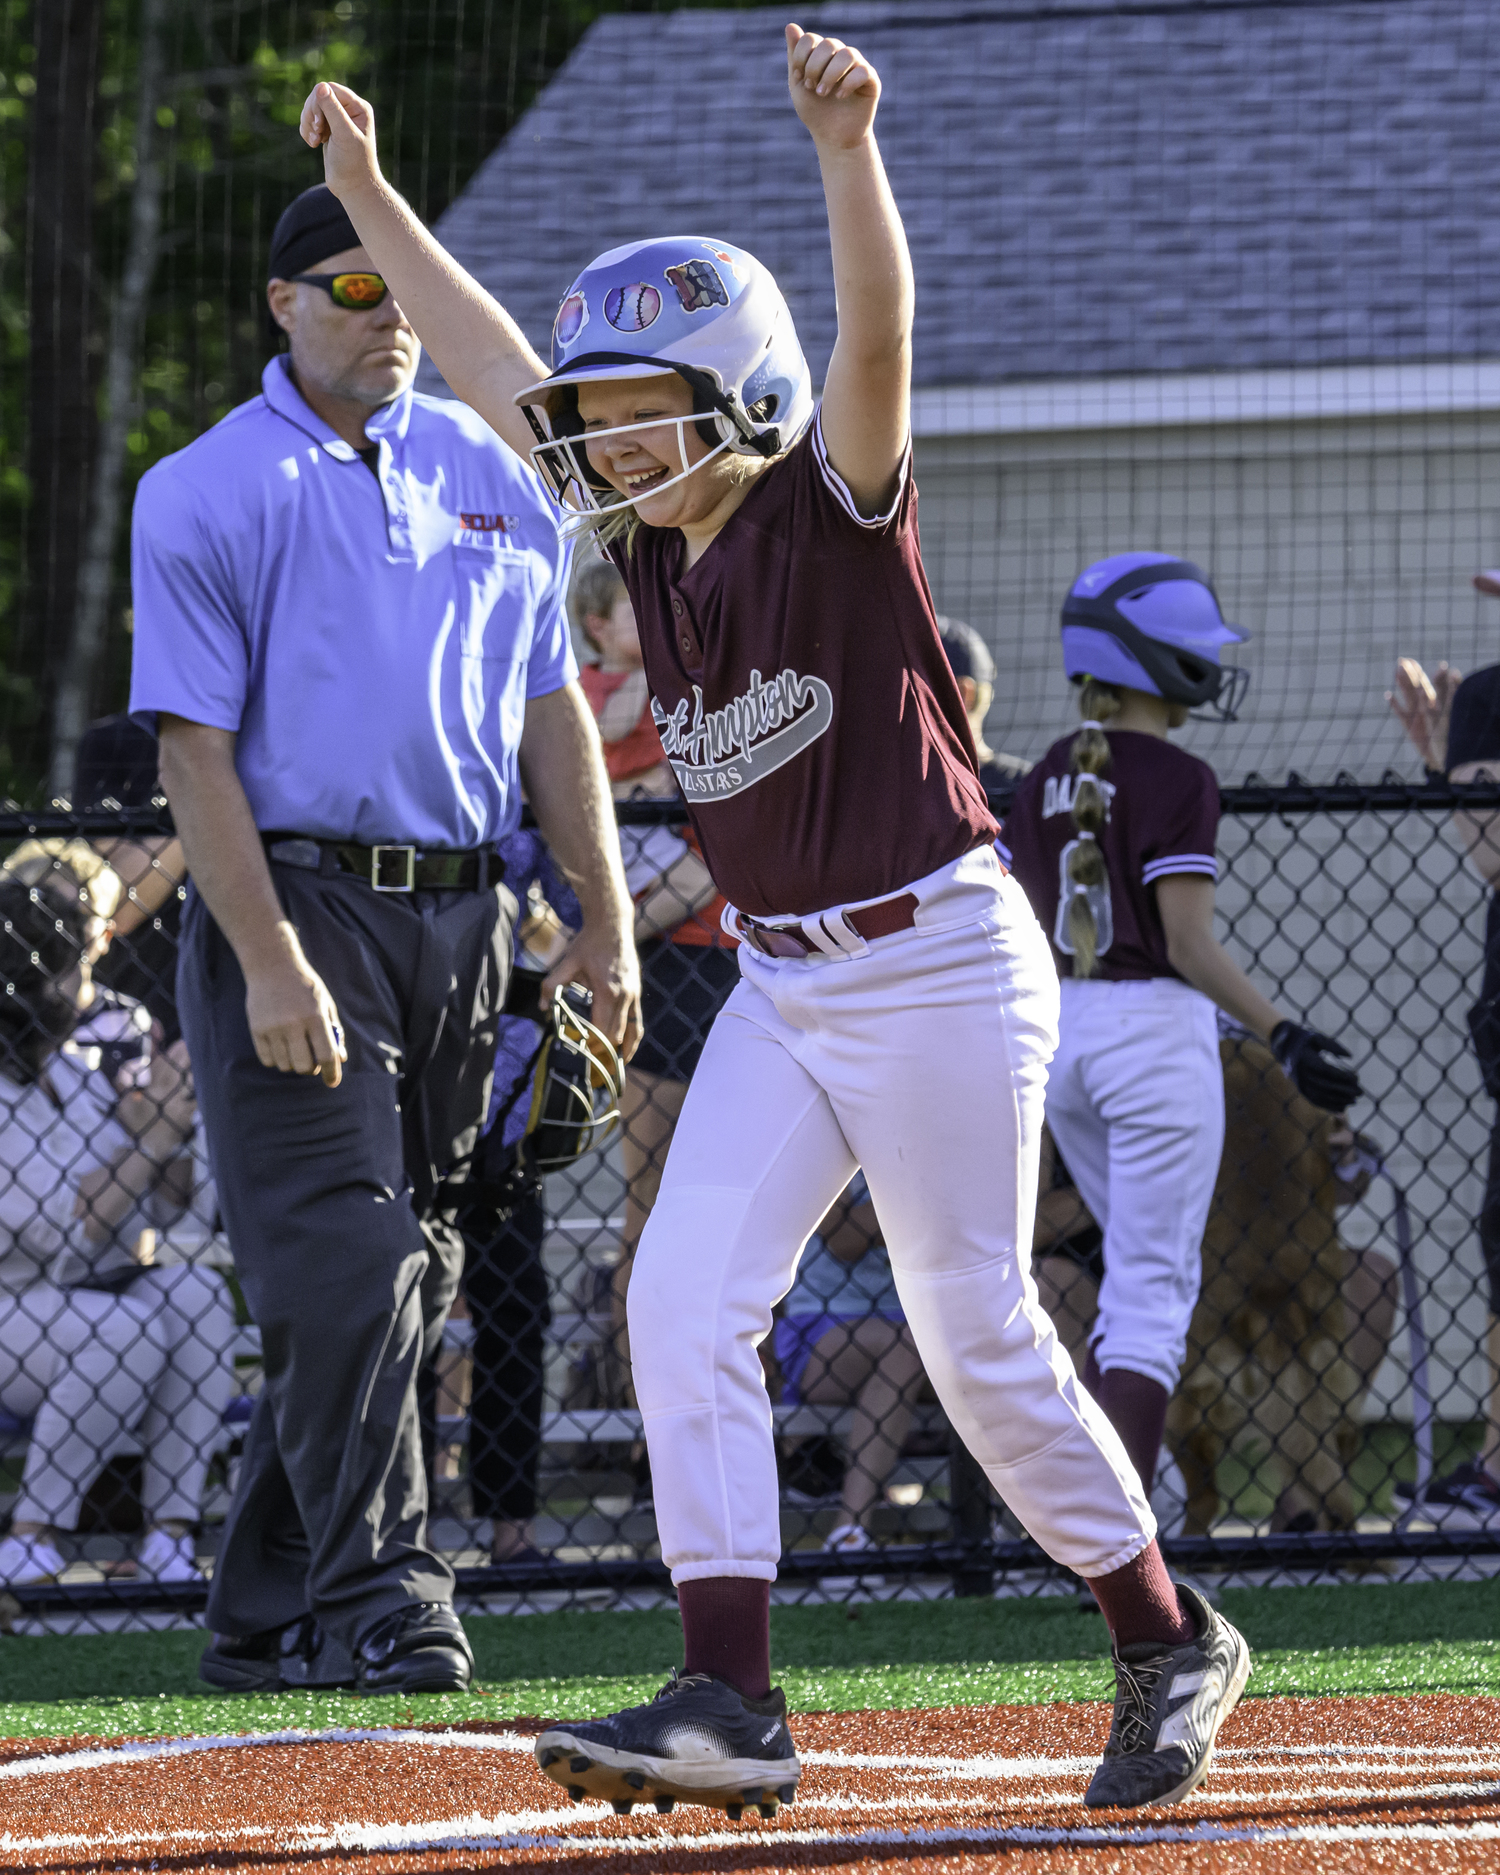 Madeline Abran is pumped up after hitting a home run.   MARIANNE BARNETT